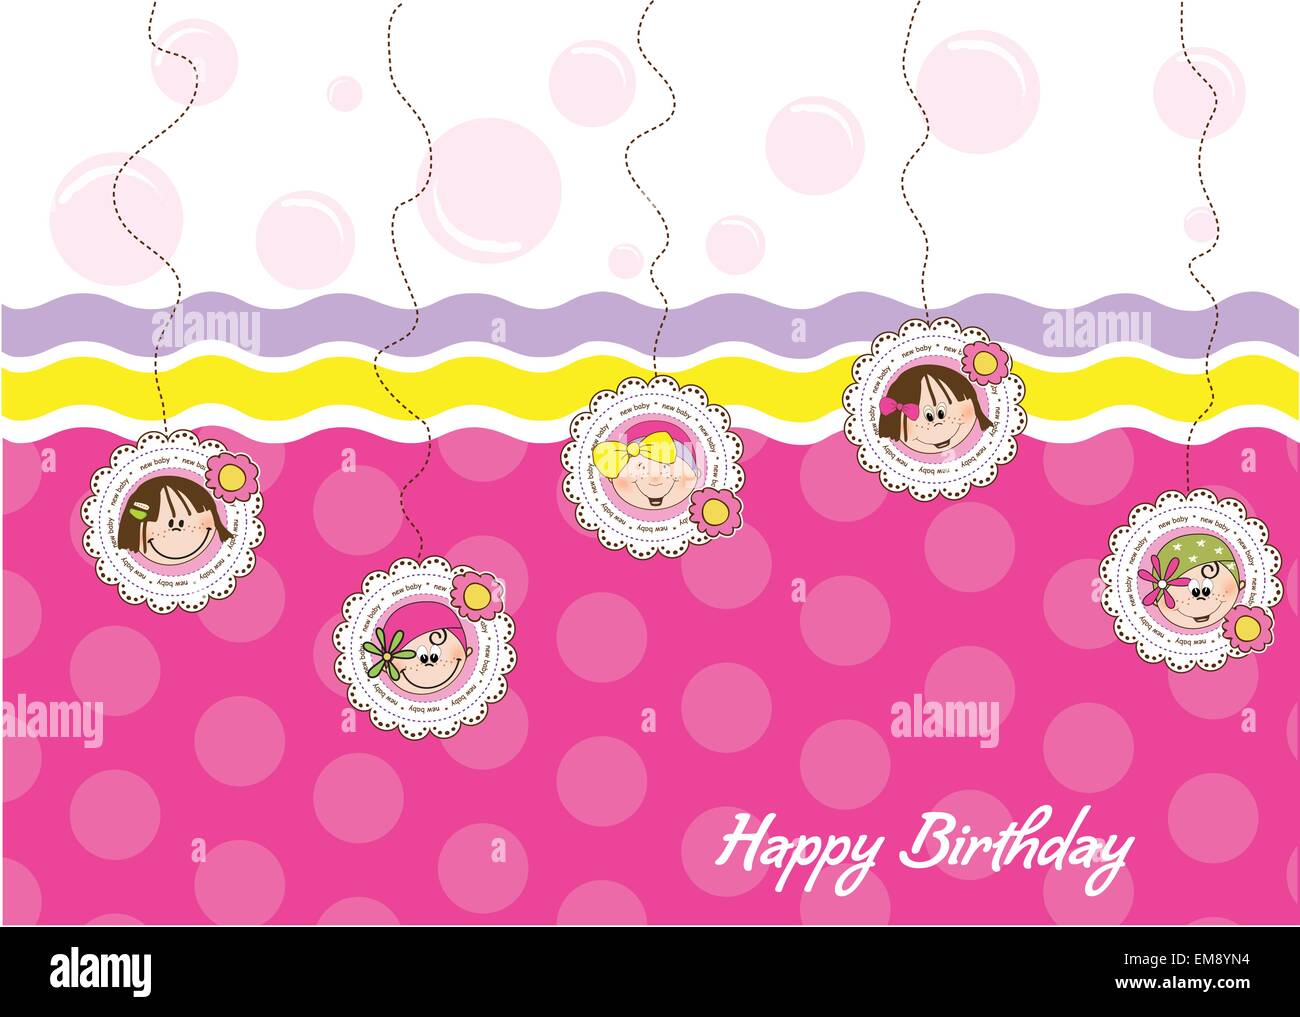 happy birthday greeting card with five little girls Stock Vector